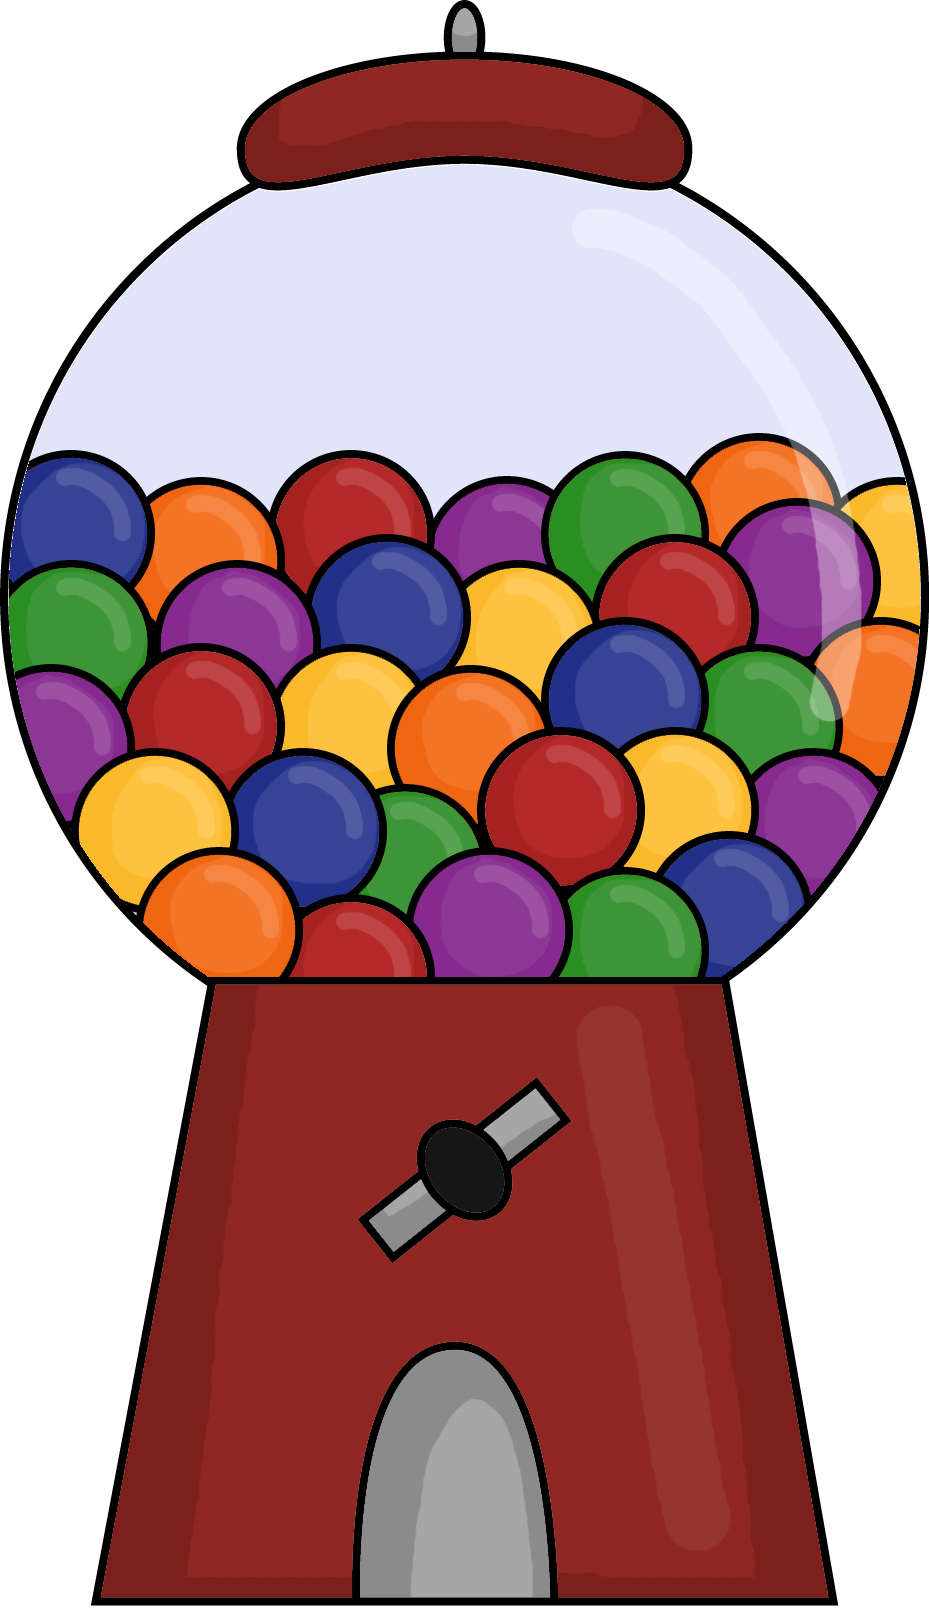 free-gumball-machine-cliparts-download-free-gumball-machine-cliparts-png-images-free-cliparts